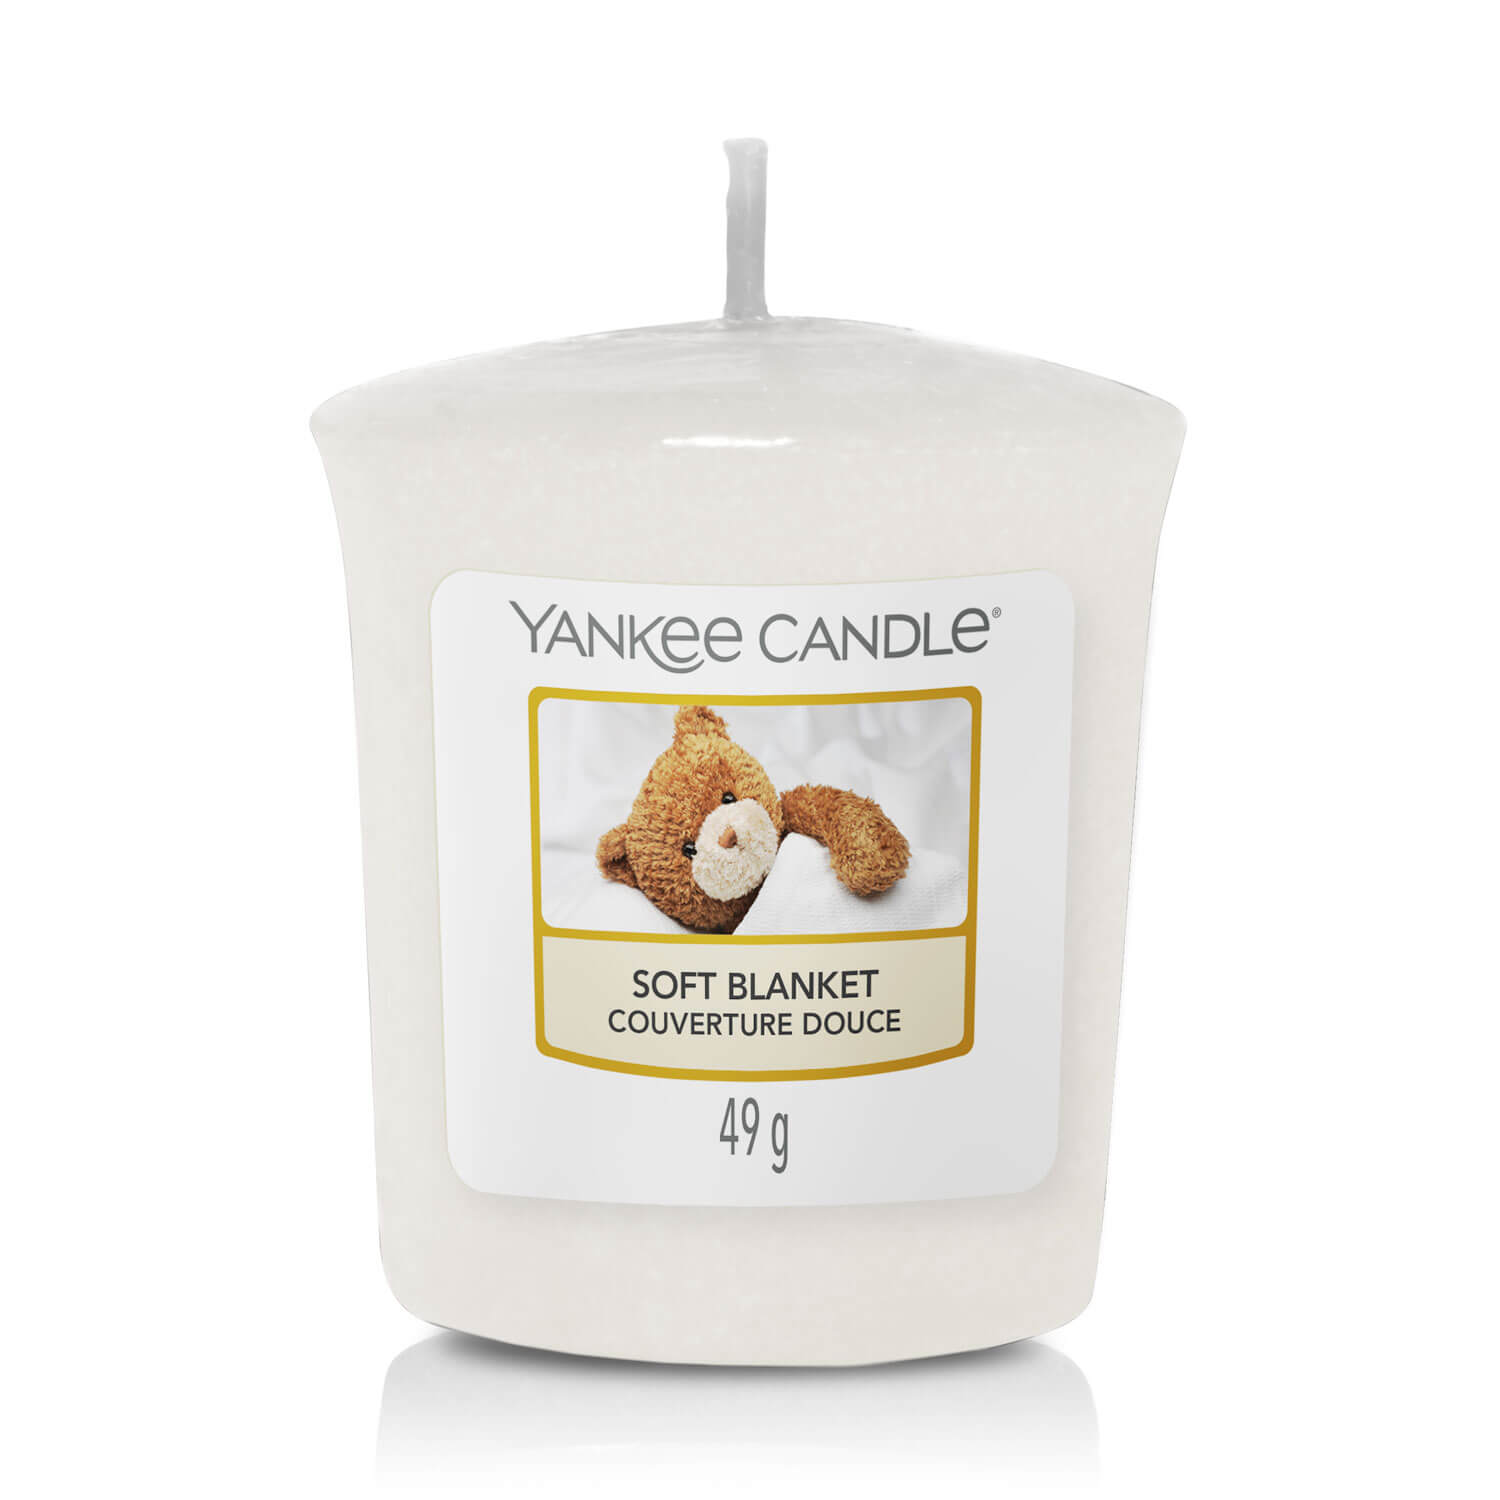 Yankee Candle Soft Blanket Votive 1 Shaws Department Stores